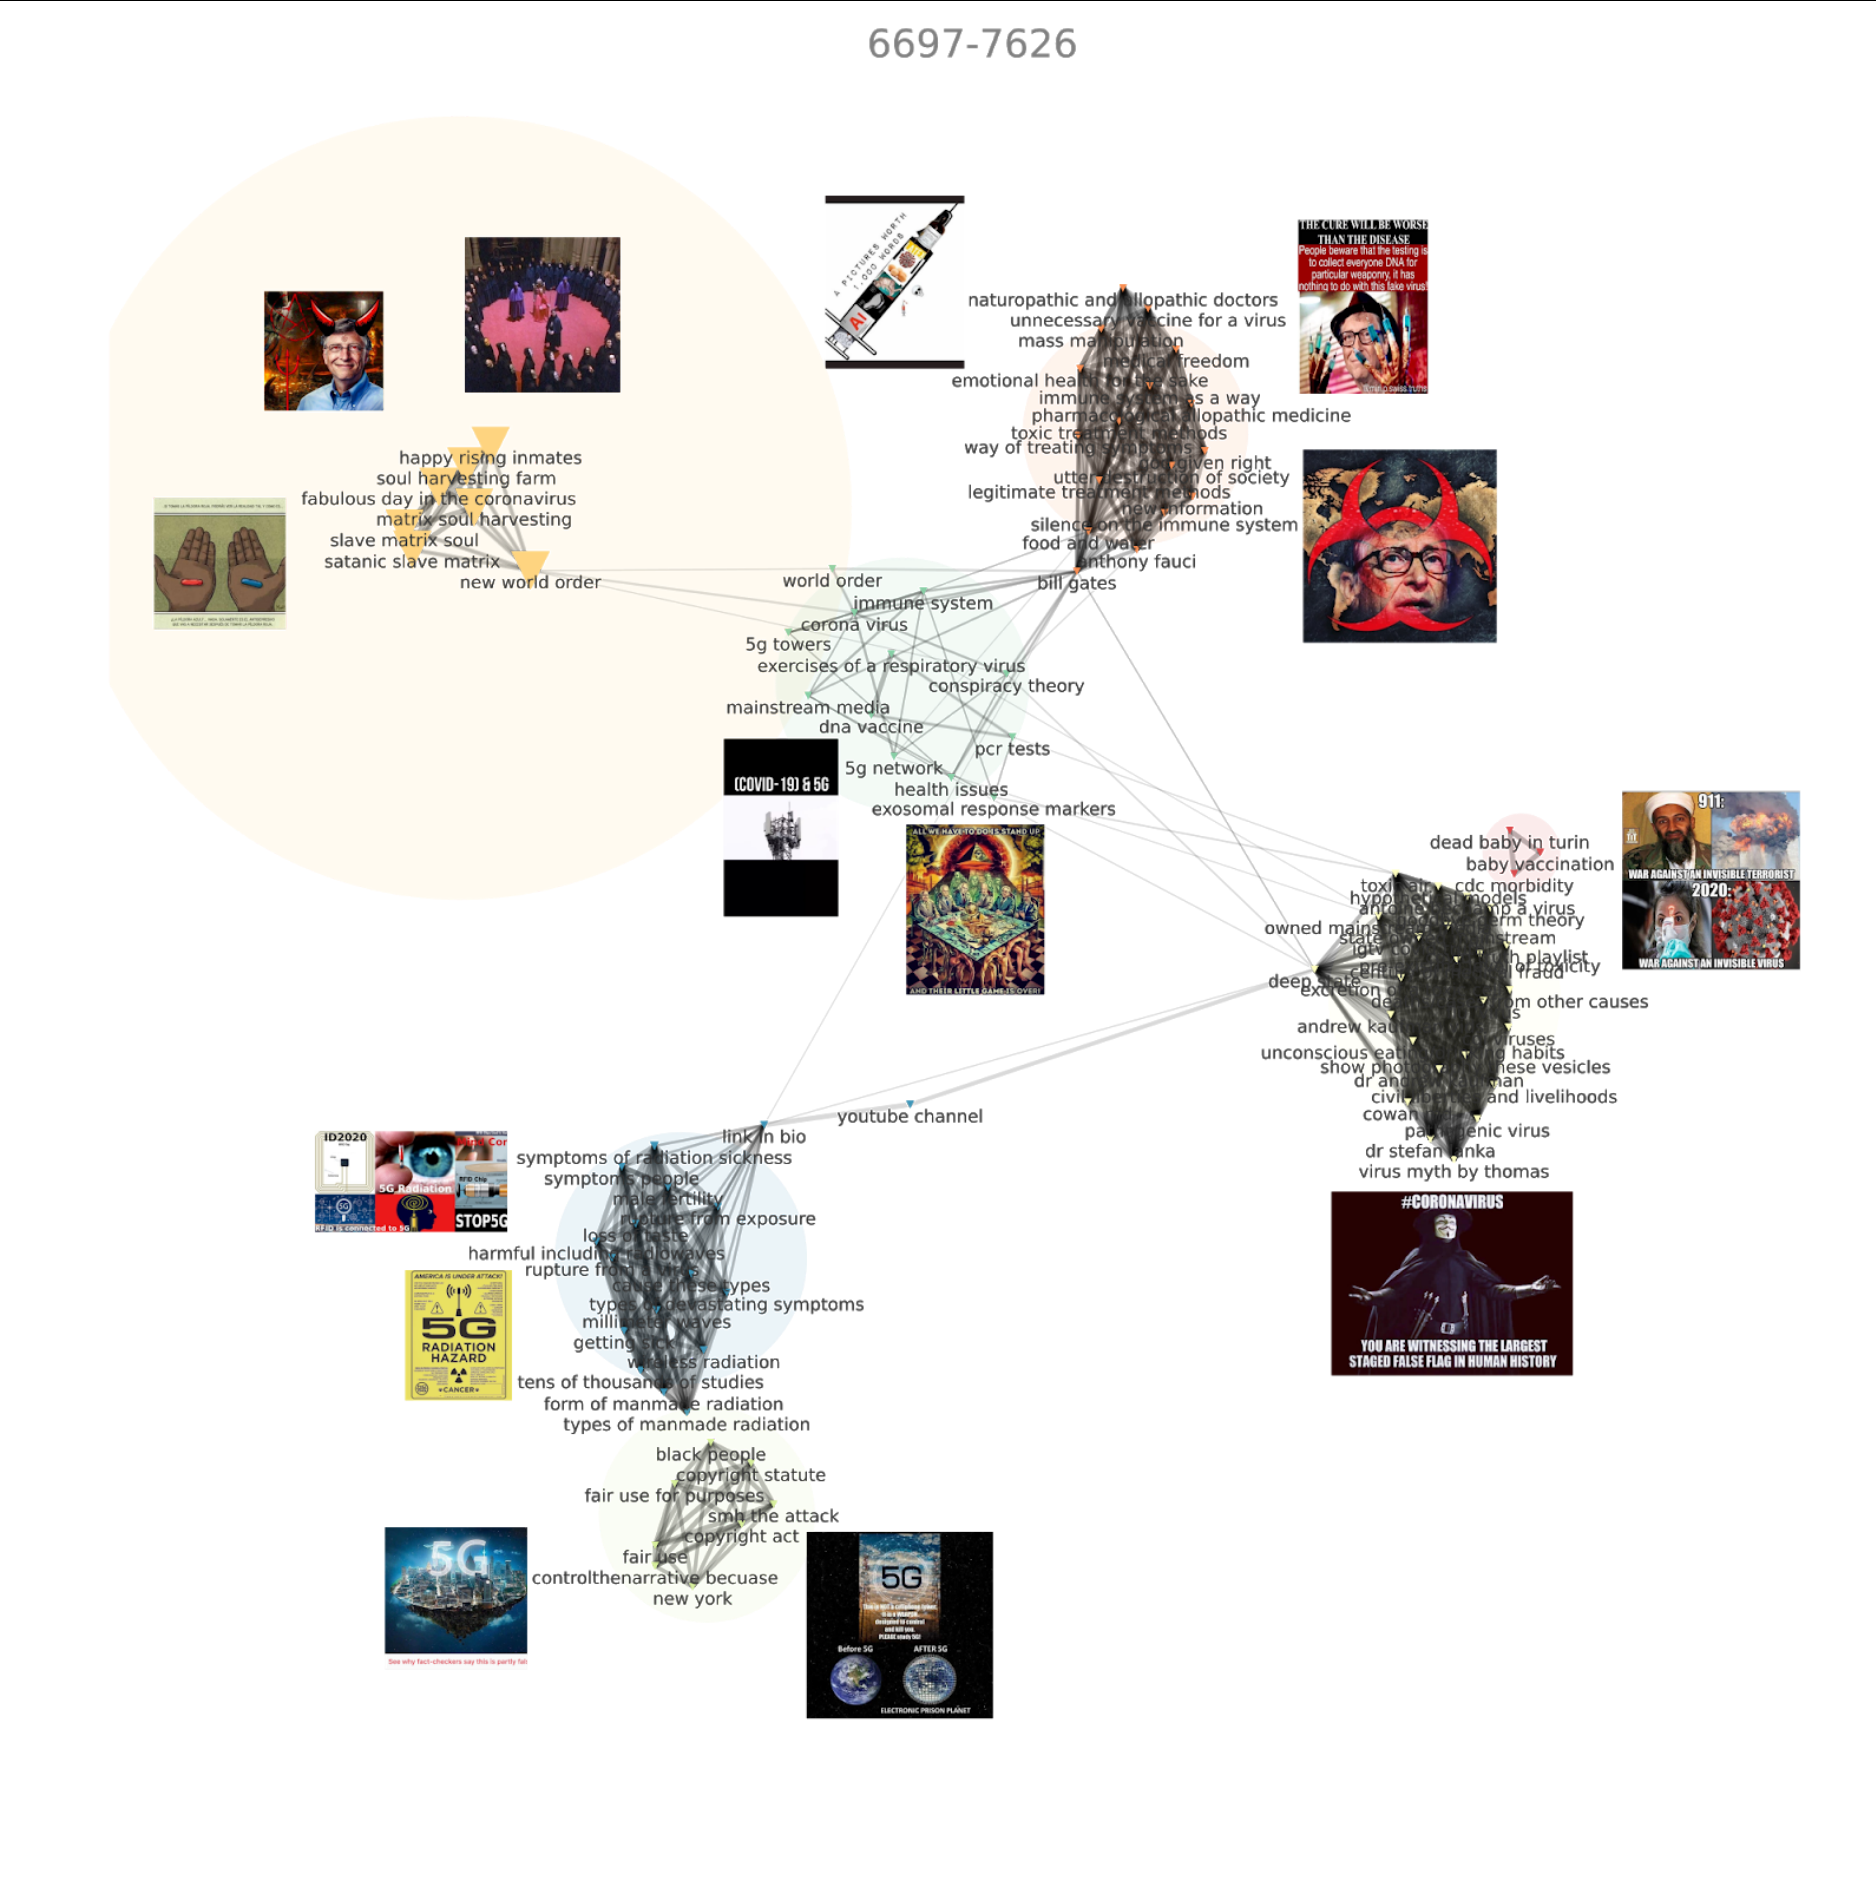 Figure 6: Co-occurences Network of Instagram posts featuring corresponding image imaginary of the users